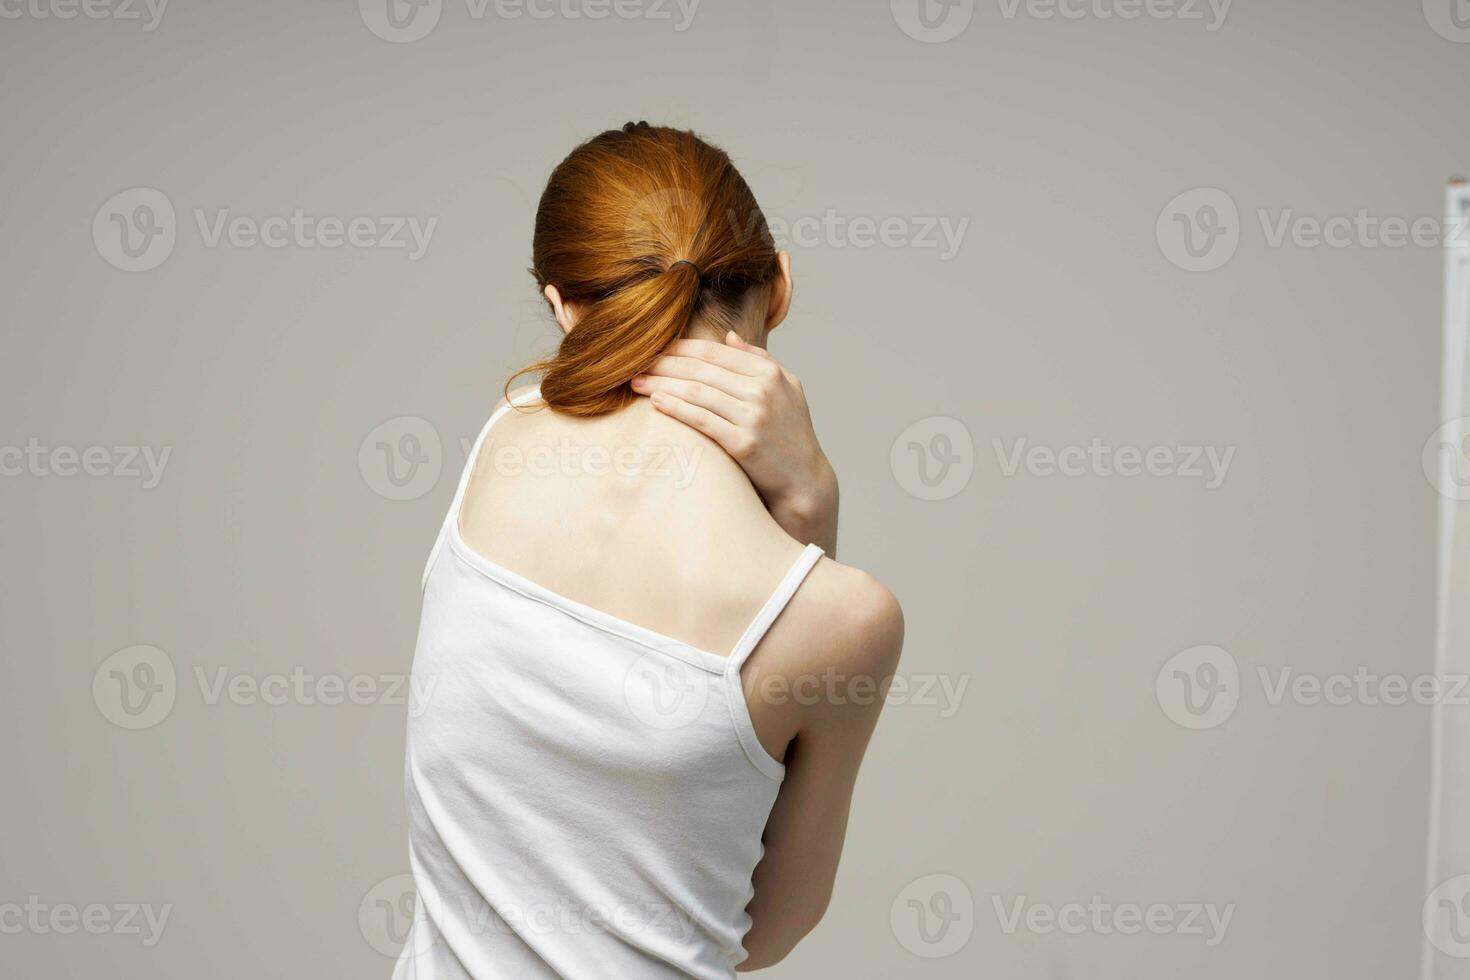 woman rheumatism pain in the neck health problems isolated background photo